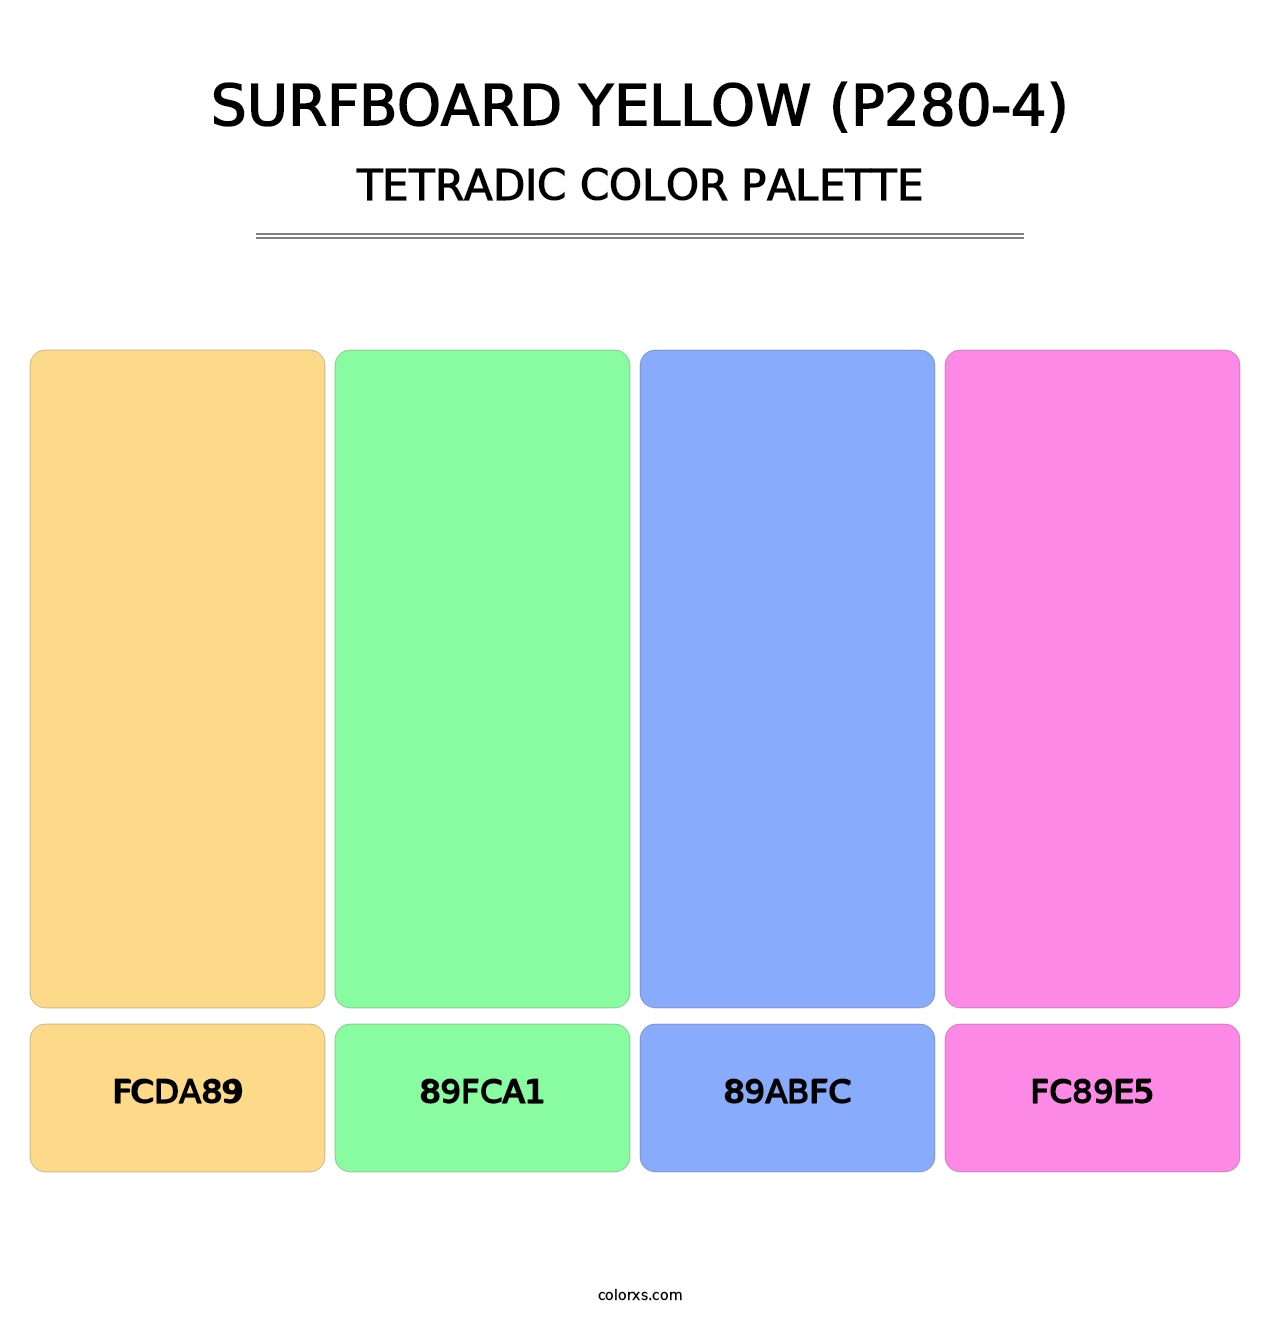 Surfboard Yellow (P280-4) - Tetradic Color Palette